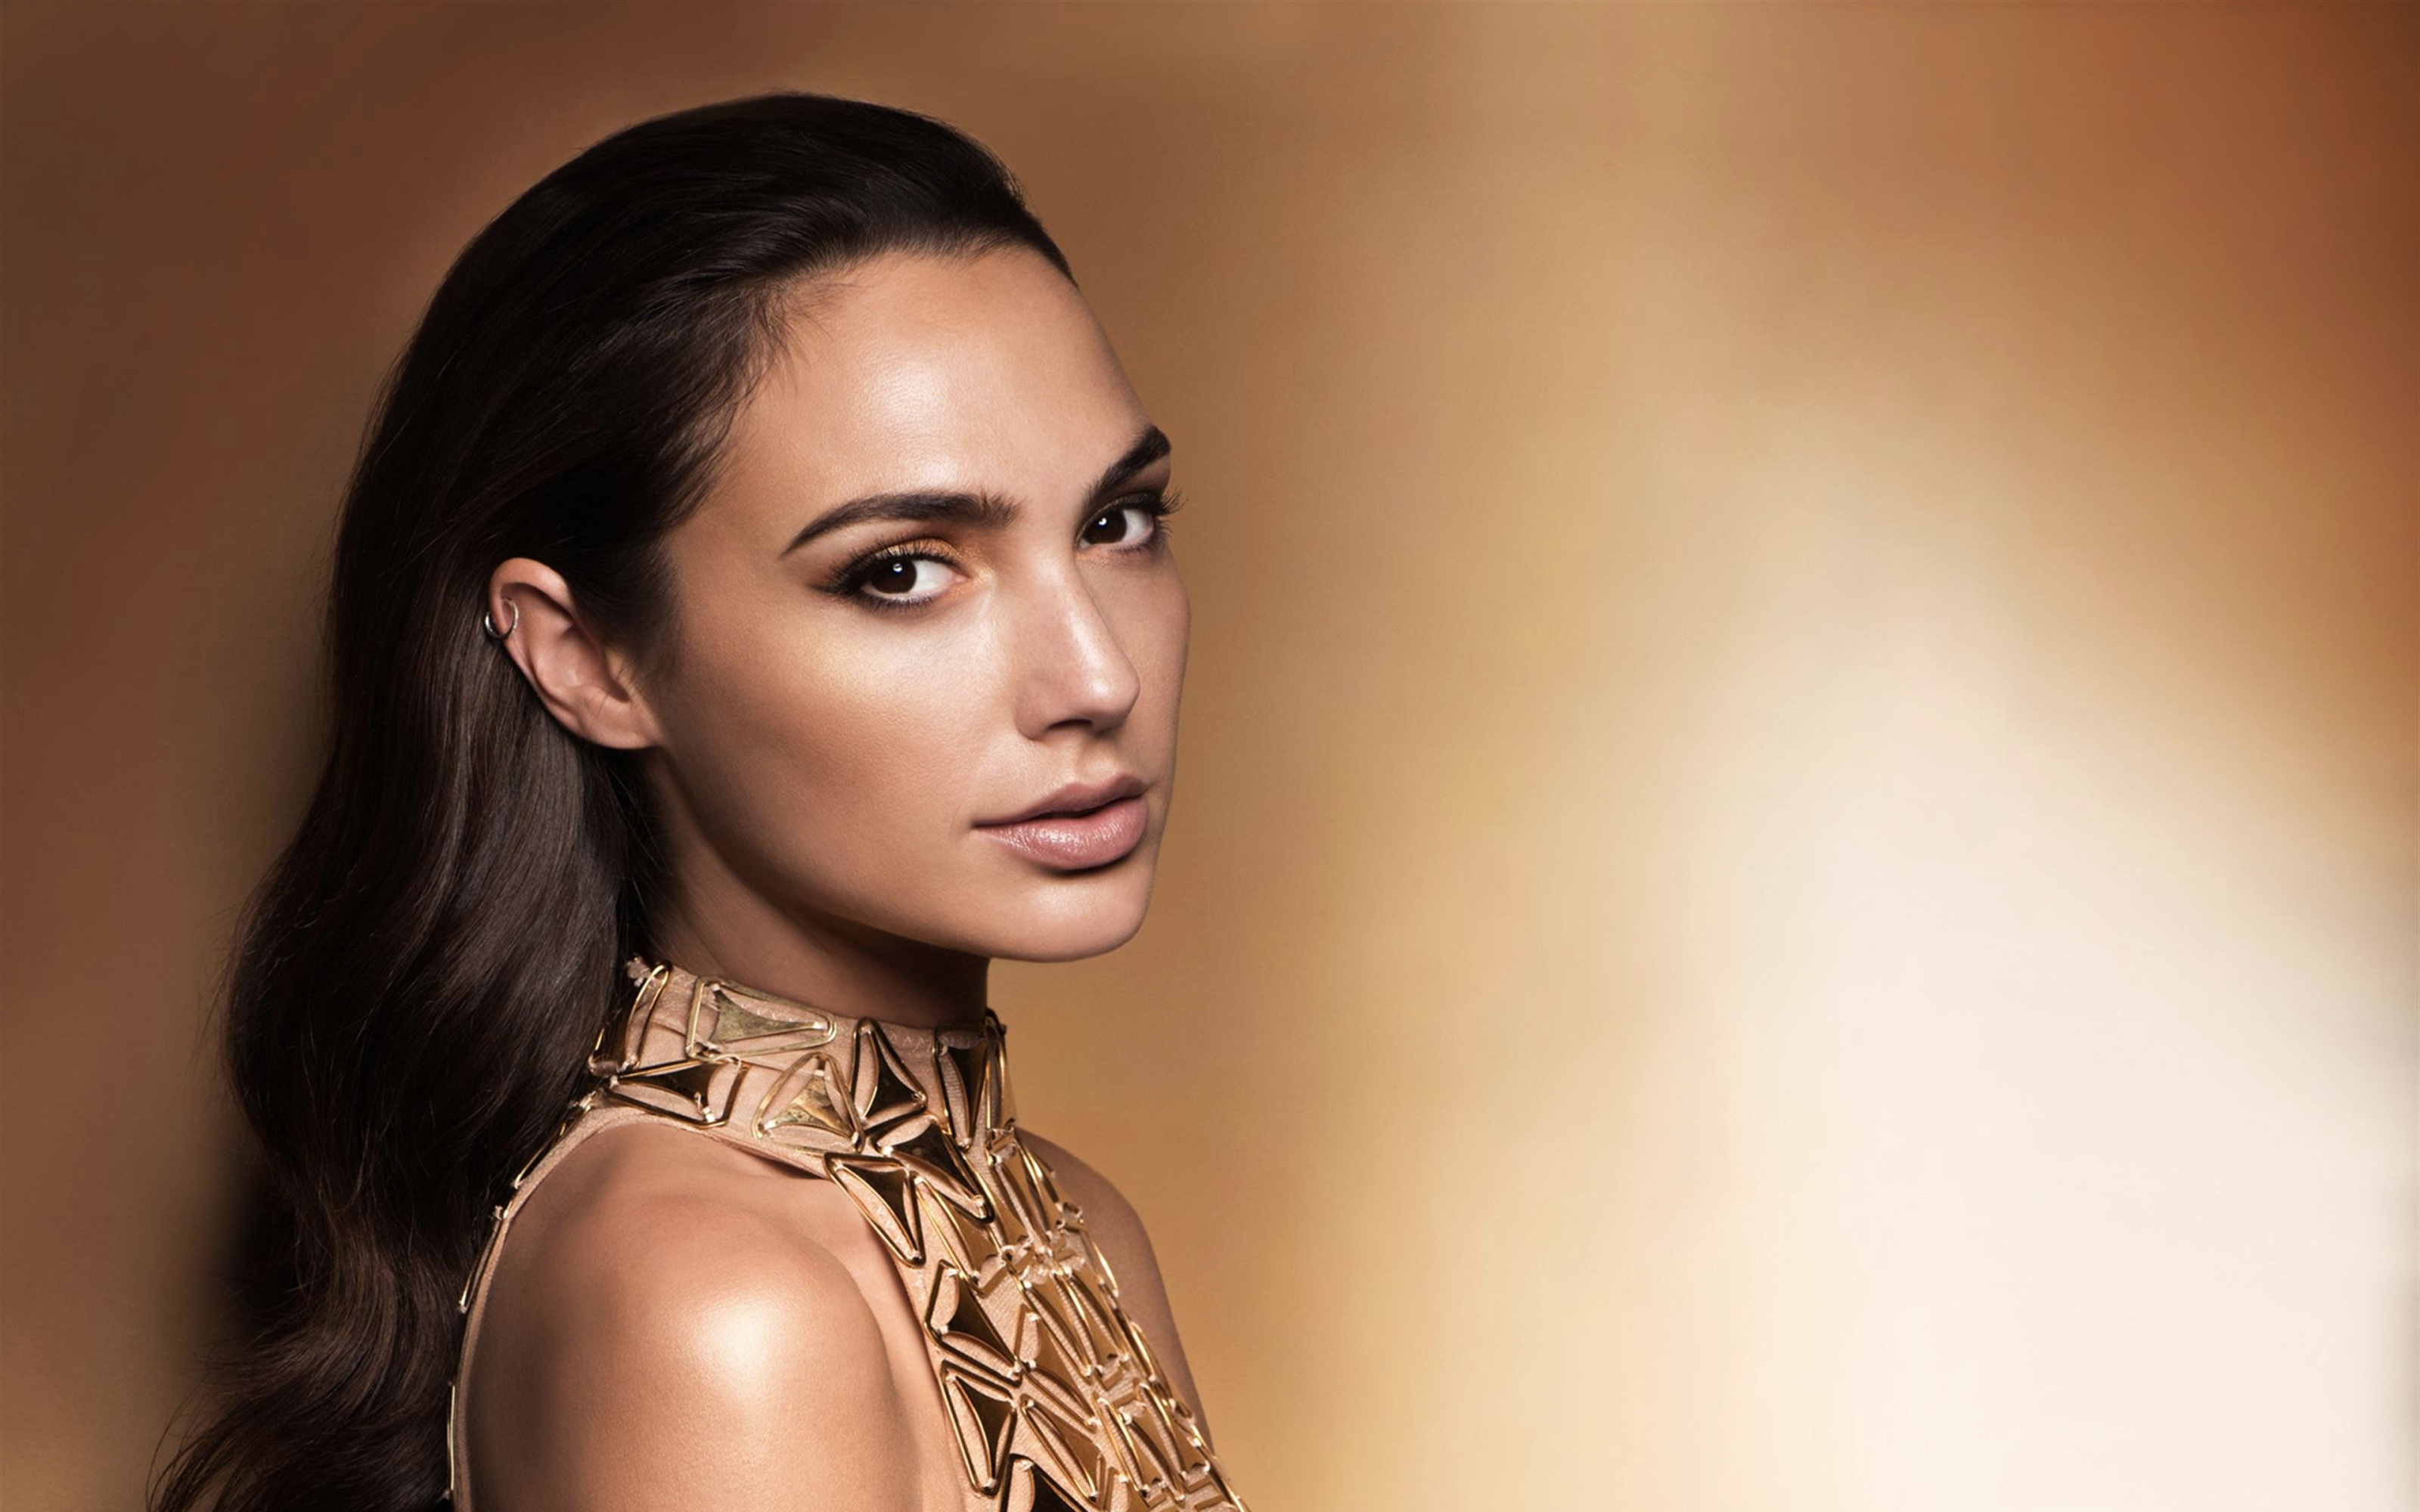 Gorgeous Gal Gadot for 3200 x 2000 Wide Retina Display resolution